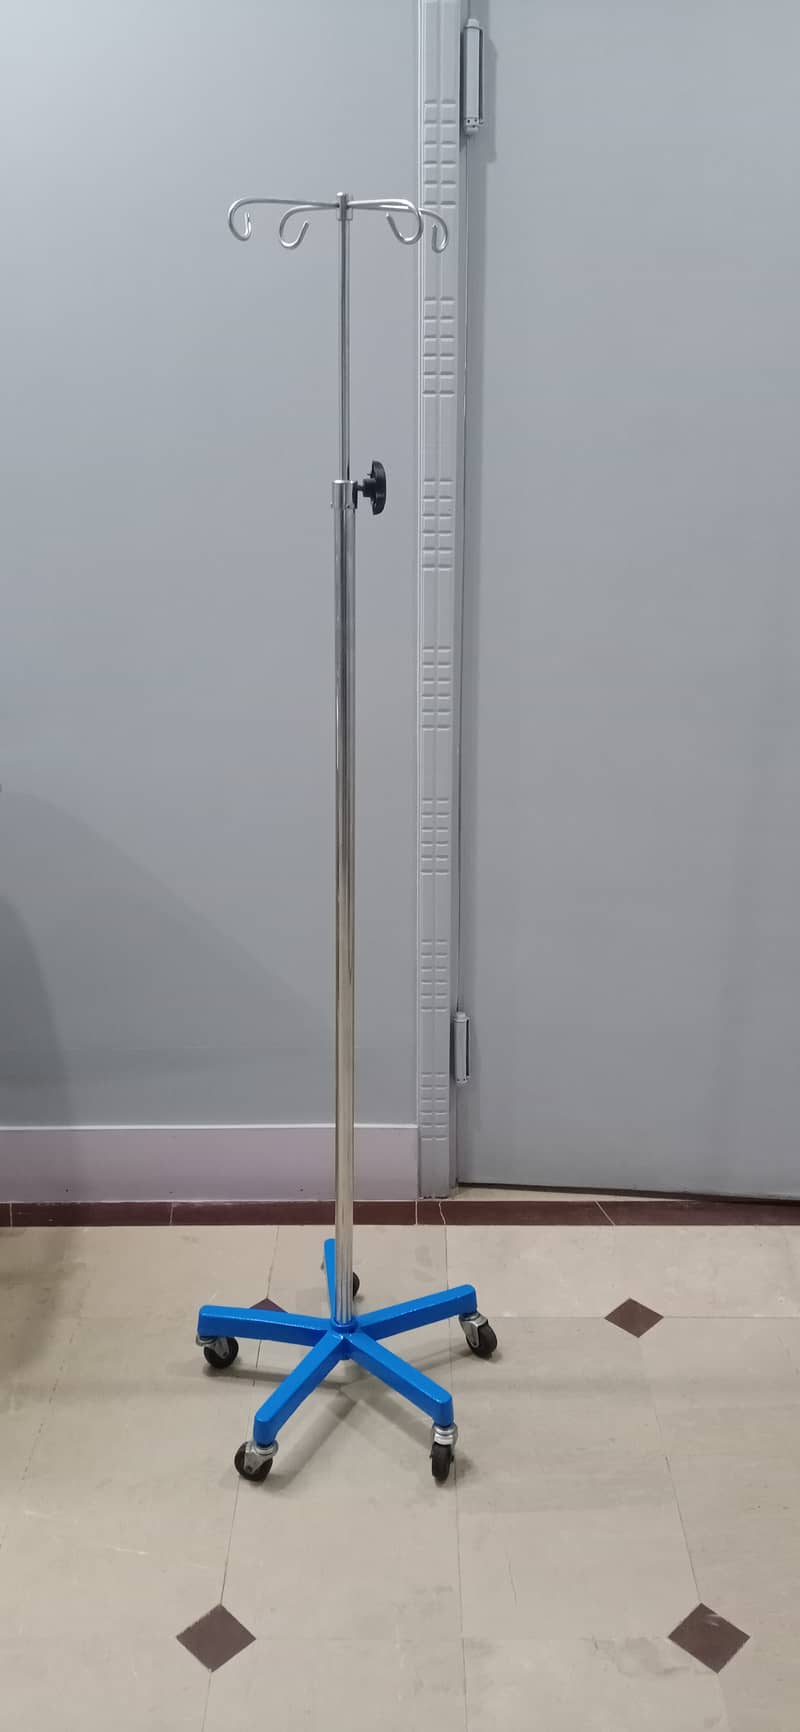 Drip Stand, IV Pole Complete Clinic / Hospital Furniture Manufacturer 11